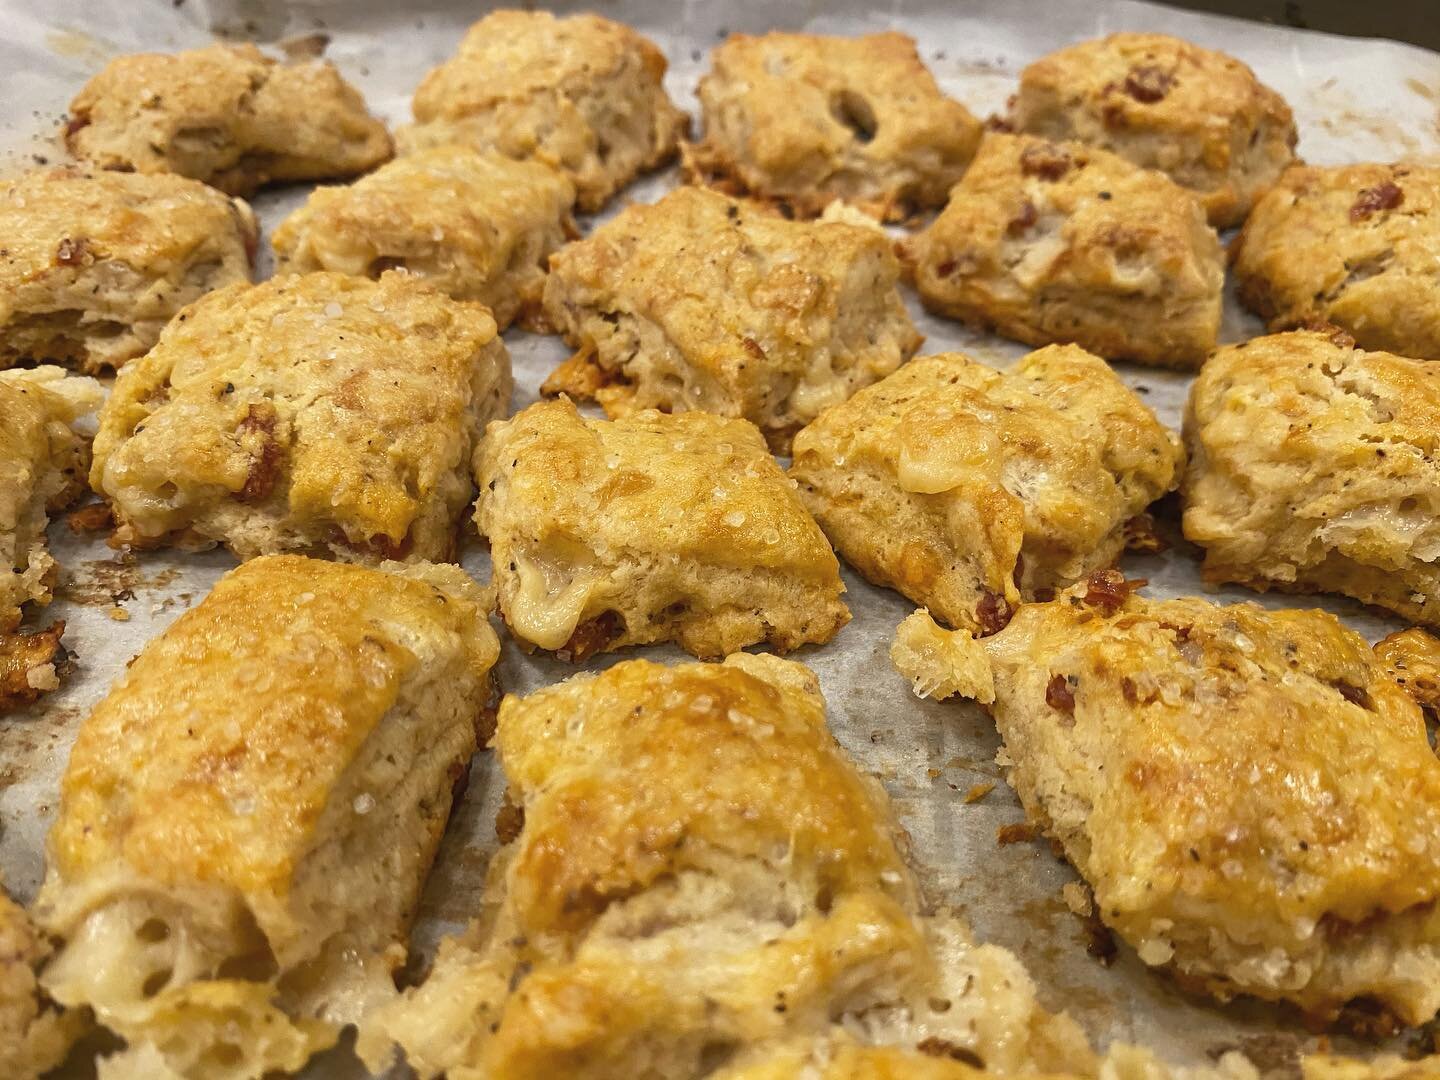 I call these Sloppy Scones. Salty, cheesy, crunchy, meaty all with just a HINT of dry vermouth.
-
If you&rsquo;ve never made scones before, get excited because they&rsquo;re easy, they&rsquo;re delicious and they take literally no time at all.
-
We&r